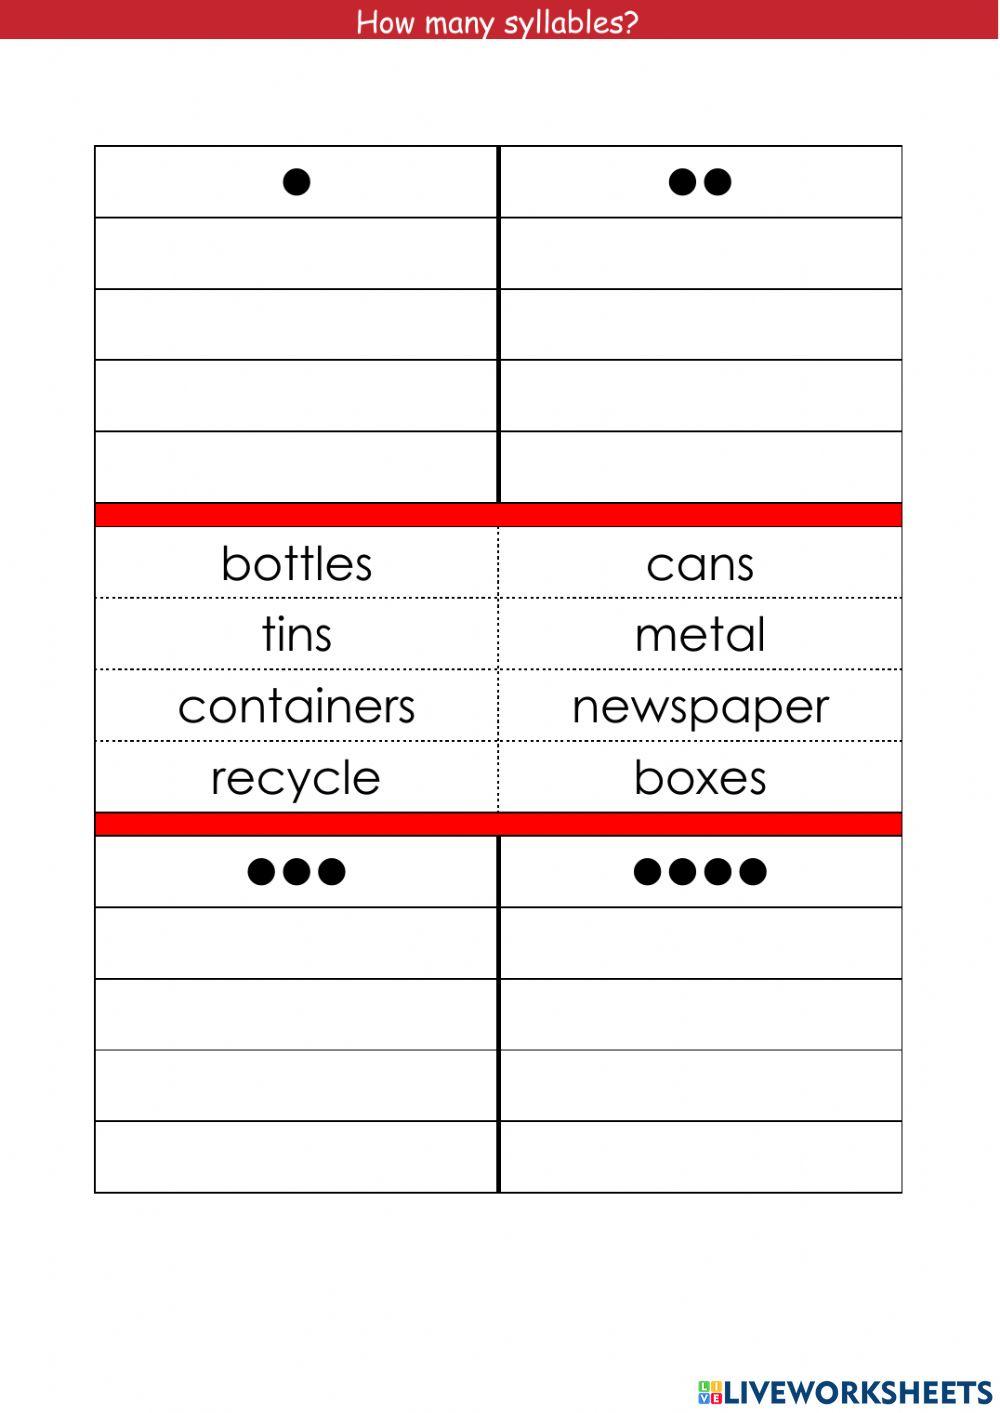 Syllables 2 recycling